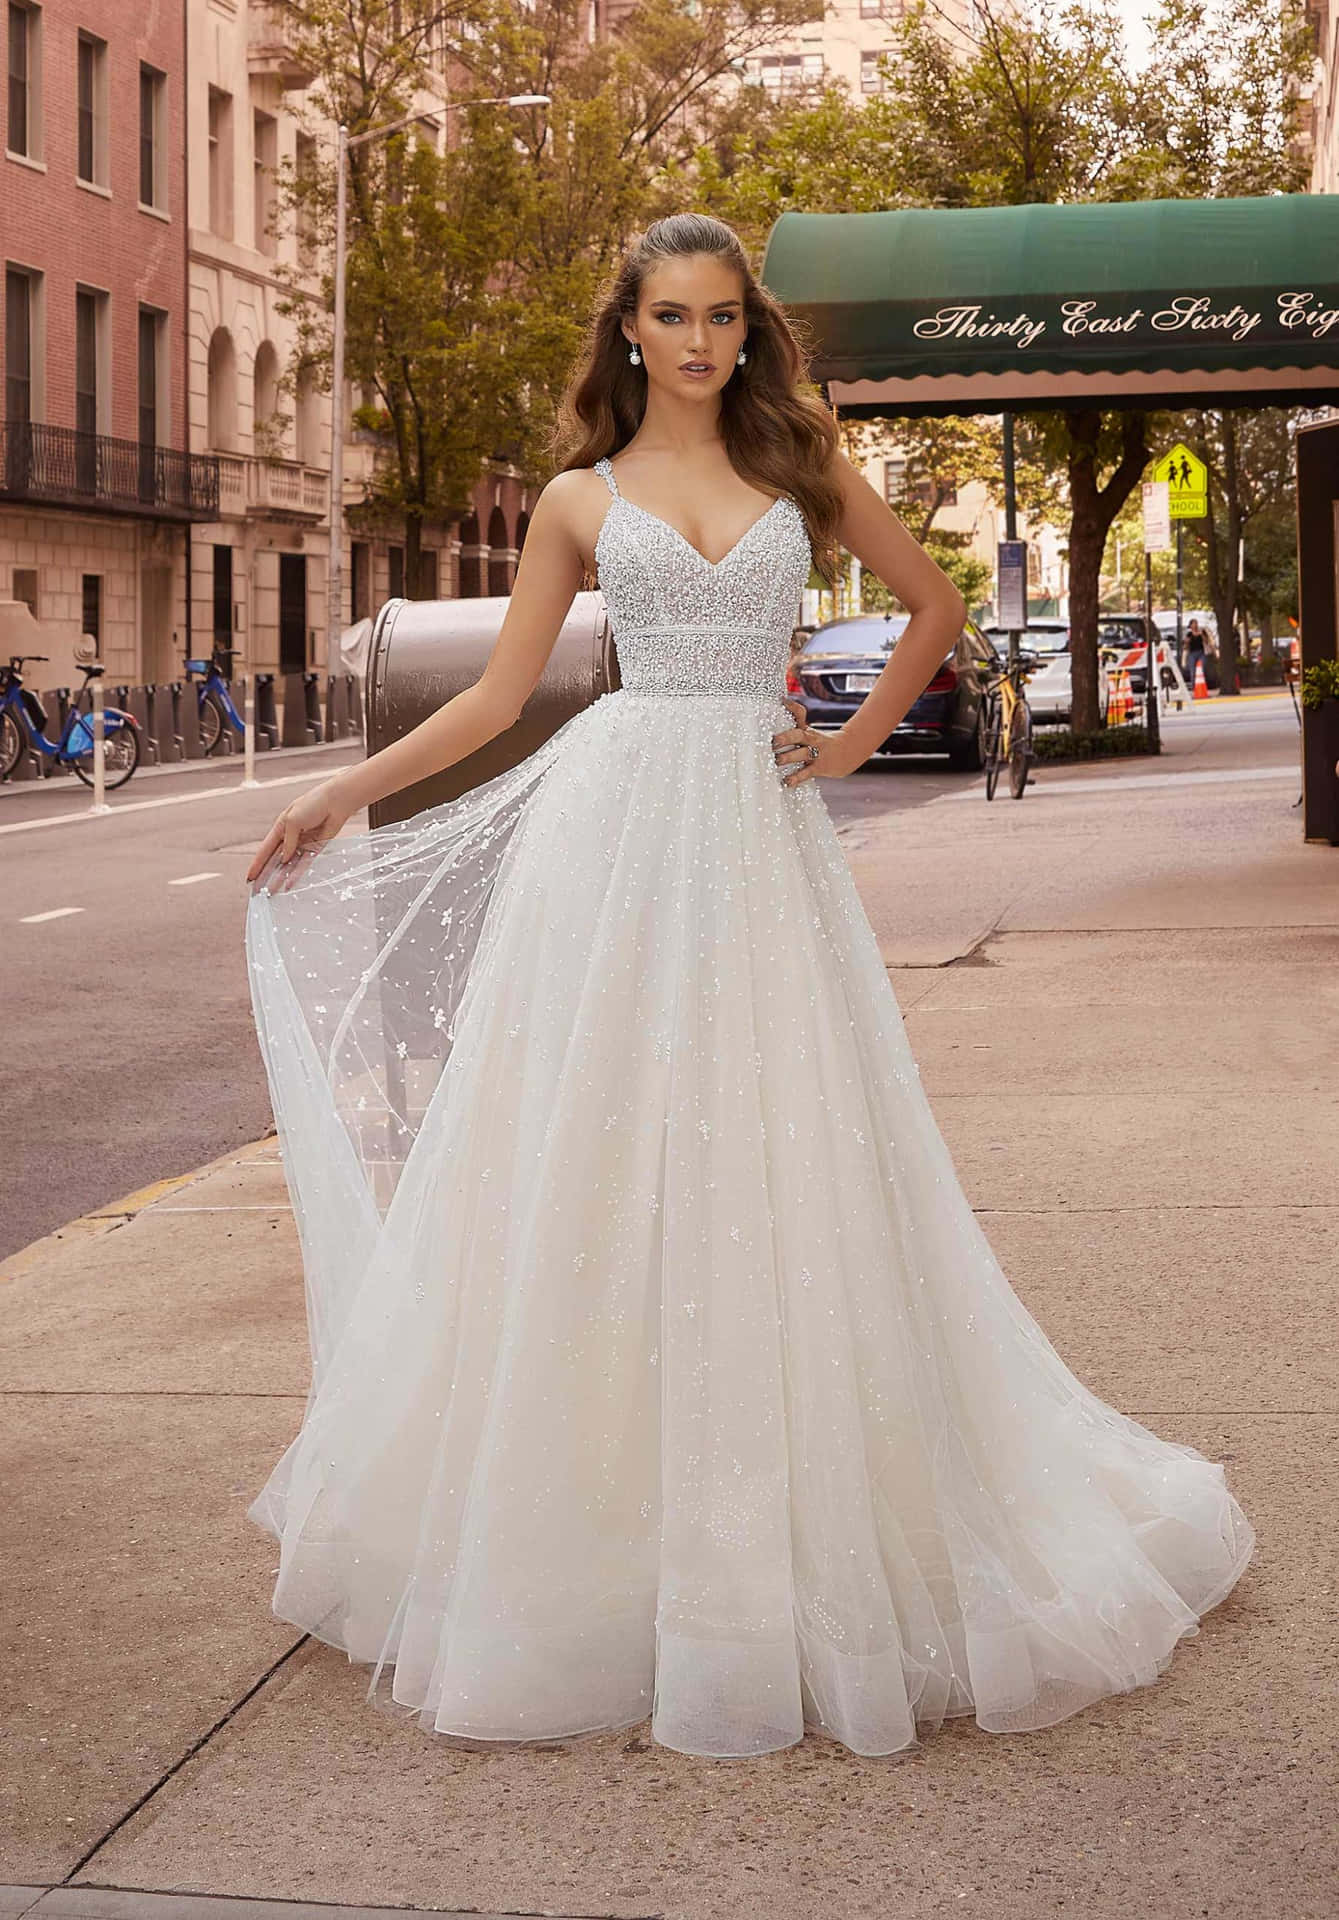 A Woman In A Wedding Dress Is Standing On The Sidewalk